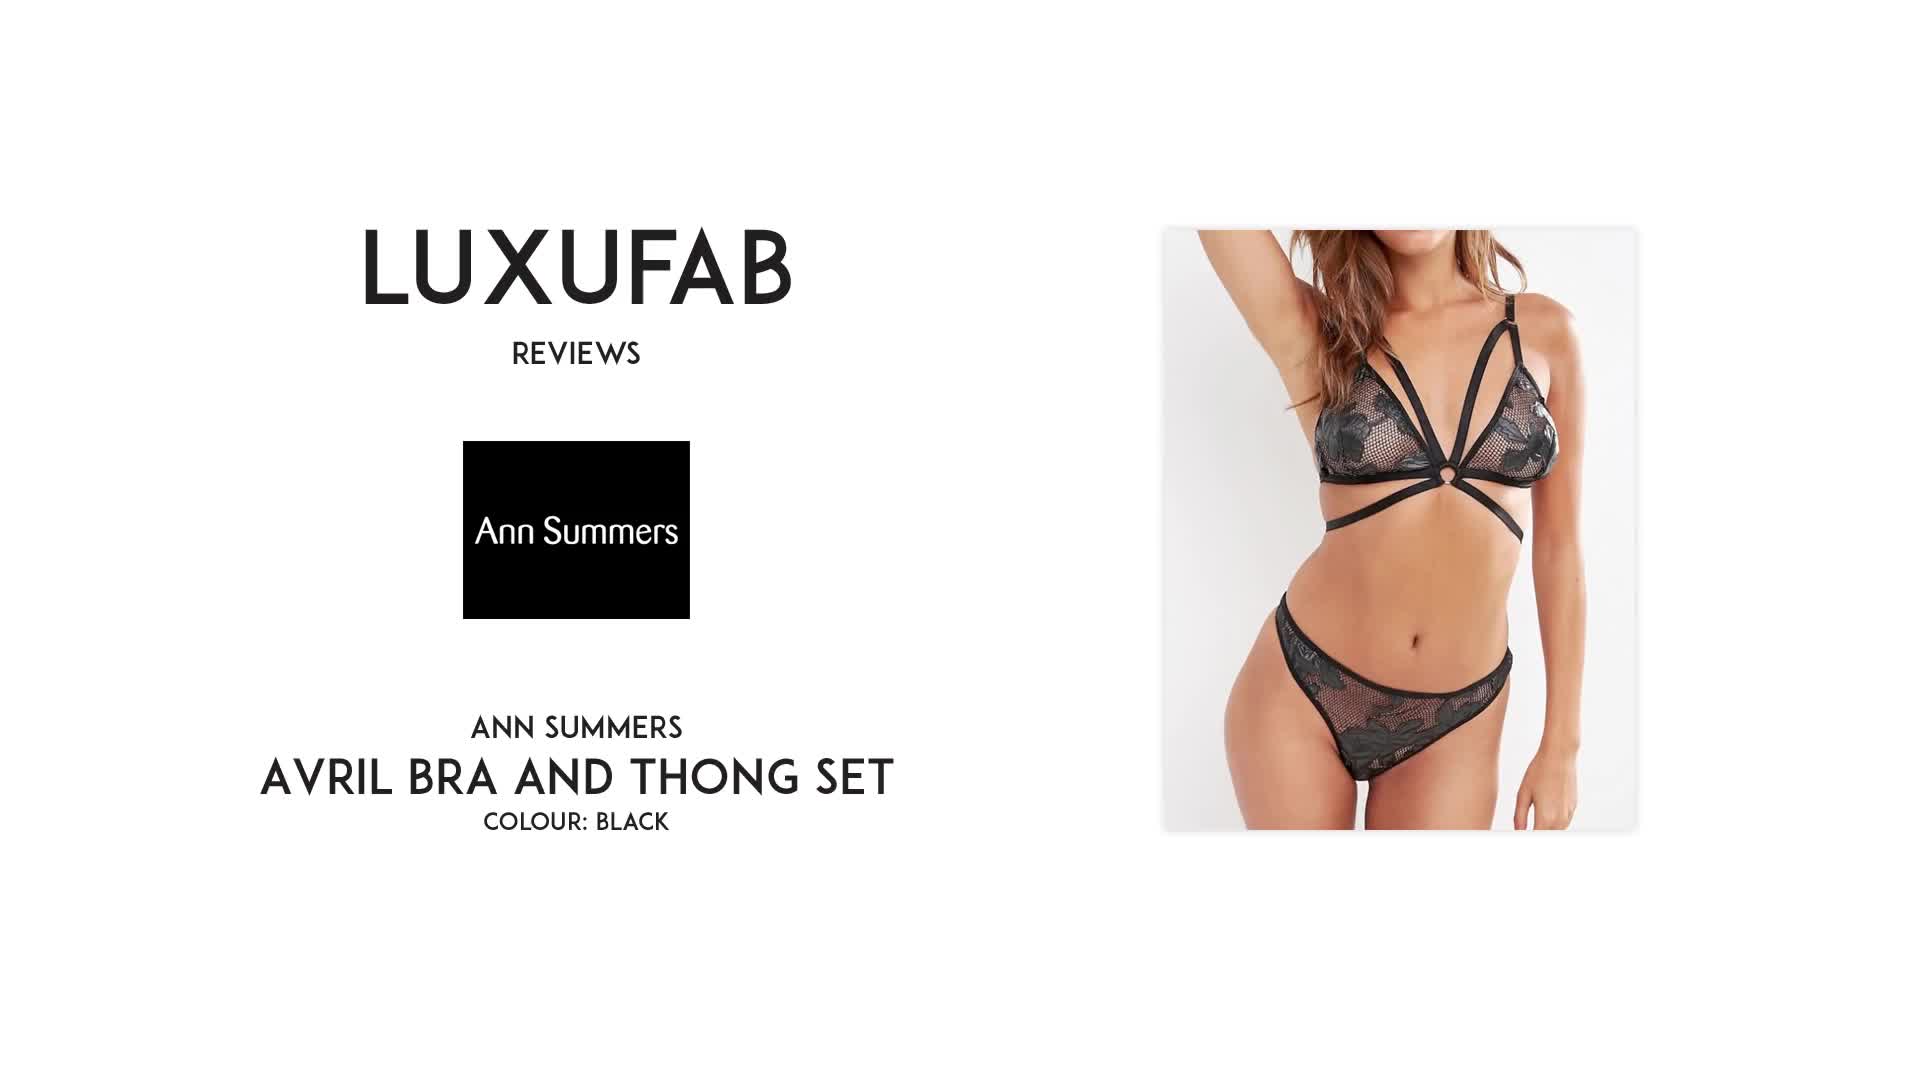 Luxufab  Ann Summers Avril bra and thong set [FULL REVIEW]